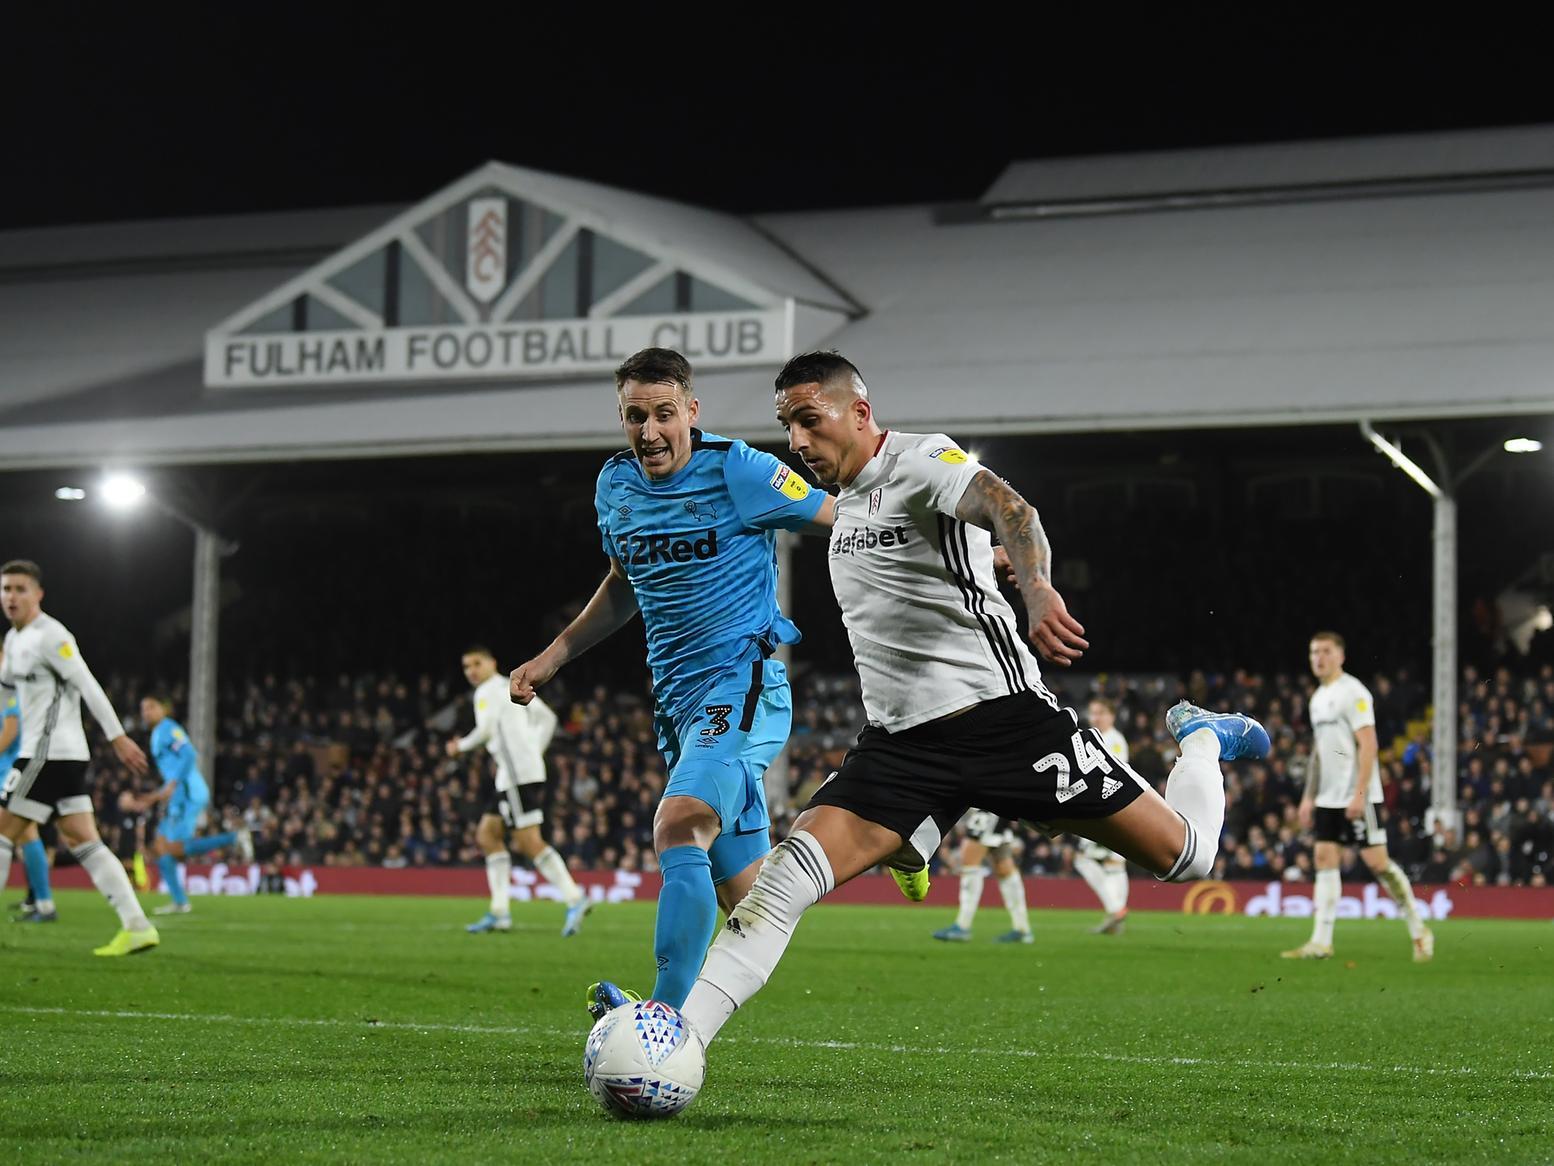 He's still on the books, but is spending this season on loan with Fulham. He's played regularly for Scott Parker's side, scoring two goals and providing two assists.